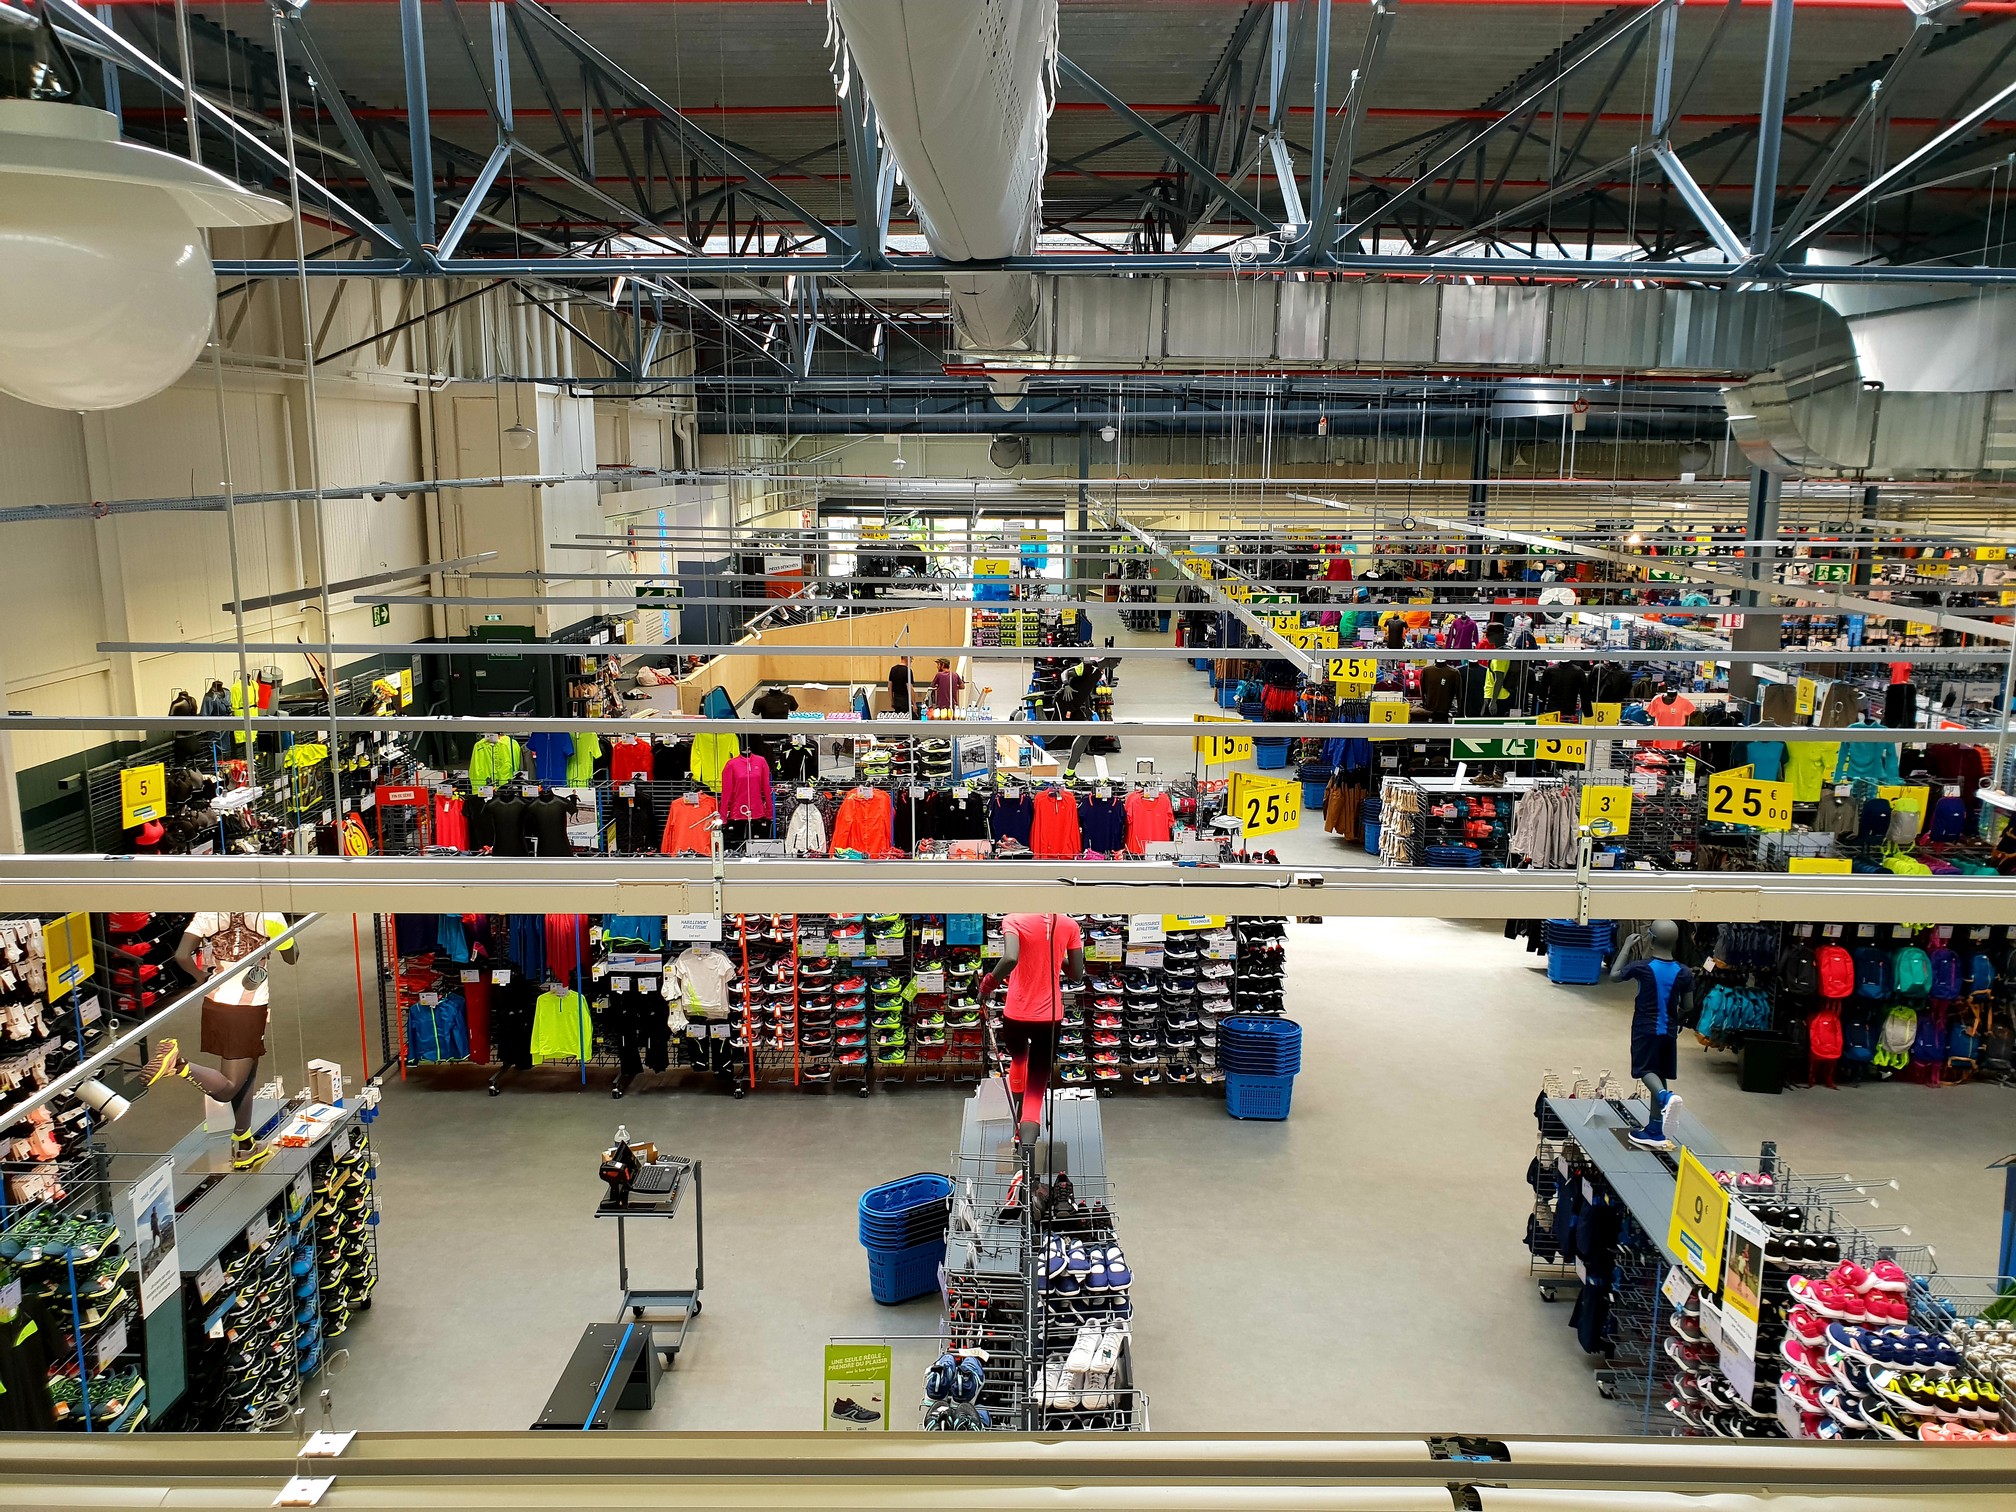  Decathlon offers not only online discounts, but also a membership club for customers who prefer to shop in person.